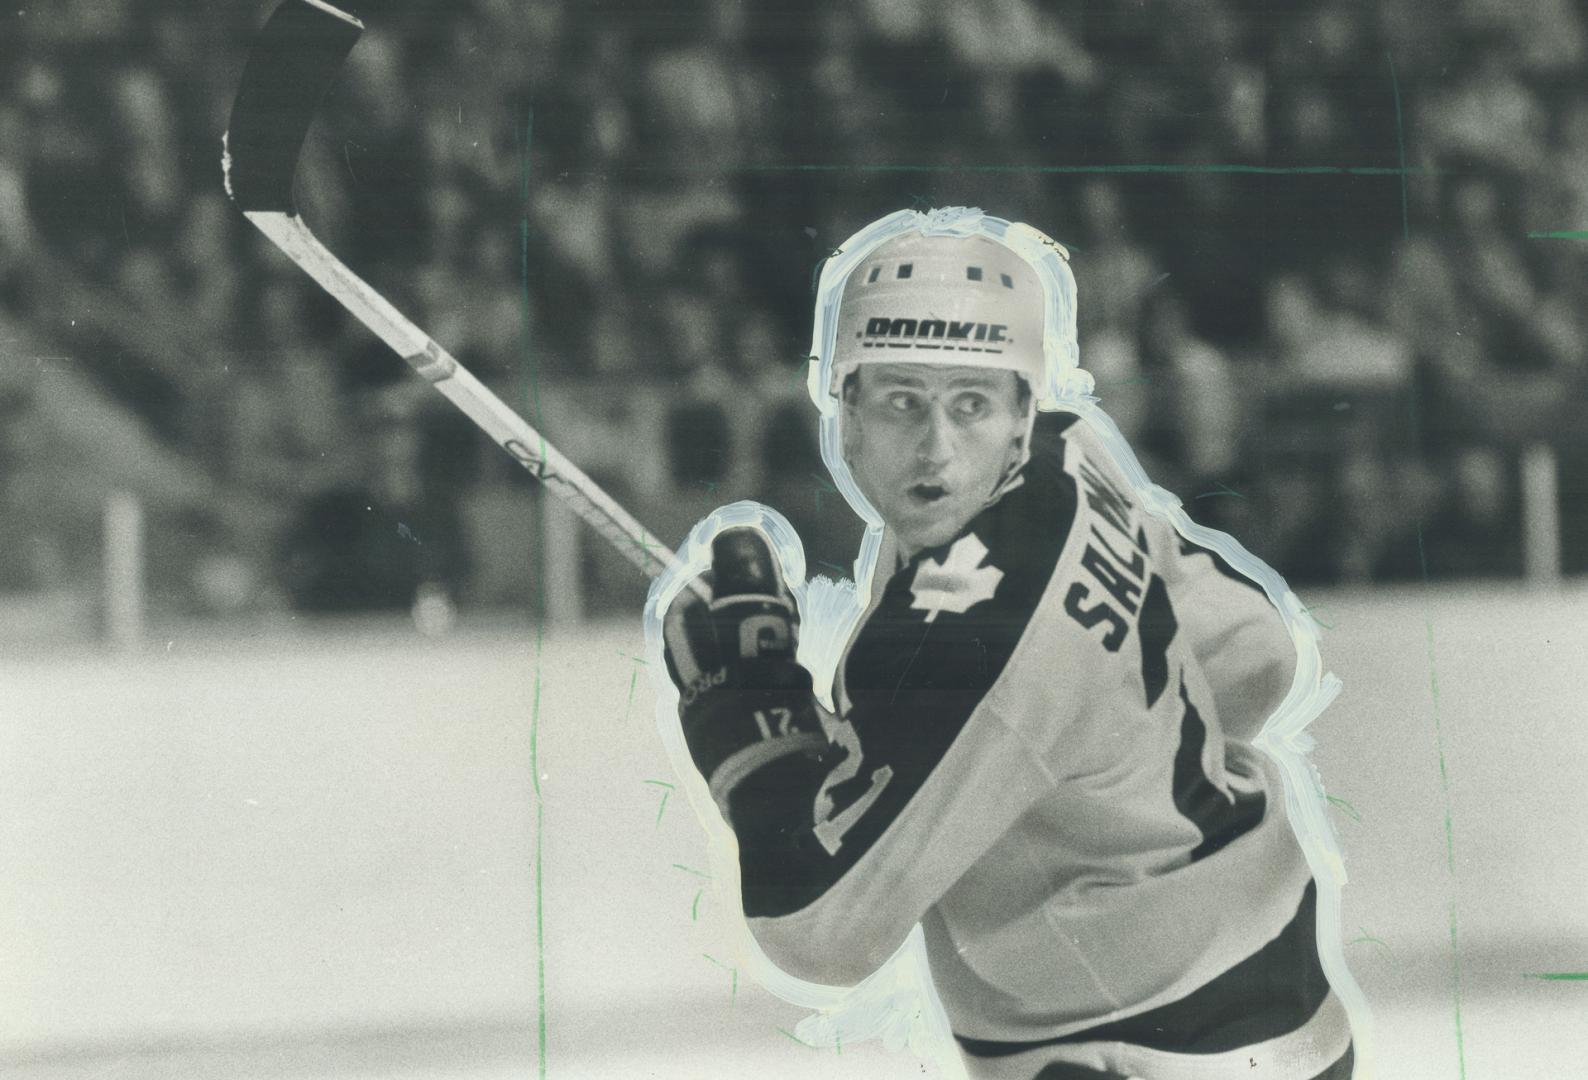 Some chicken, some Swede: When Borje Salming first arrived in the National league, in 1973, he got the usual chicken Swede greeting from North American players, but figures a few elbows cured that